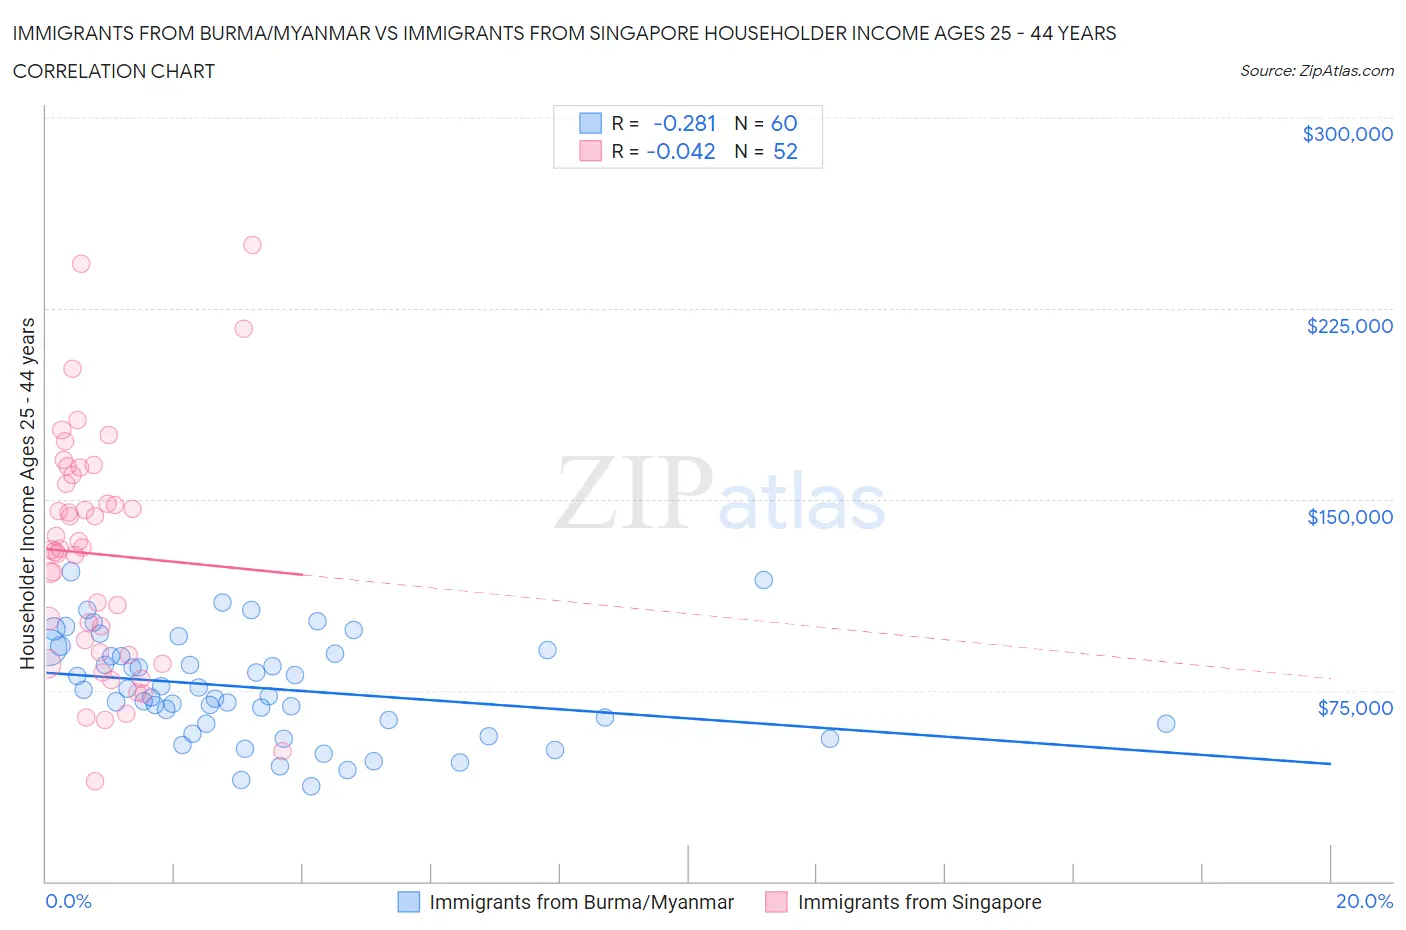 Immigrants from Burma/Myanmar vs Immigrants from Singapore Householder Income Ages 25 - 44 years